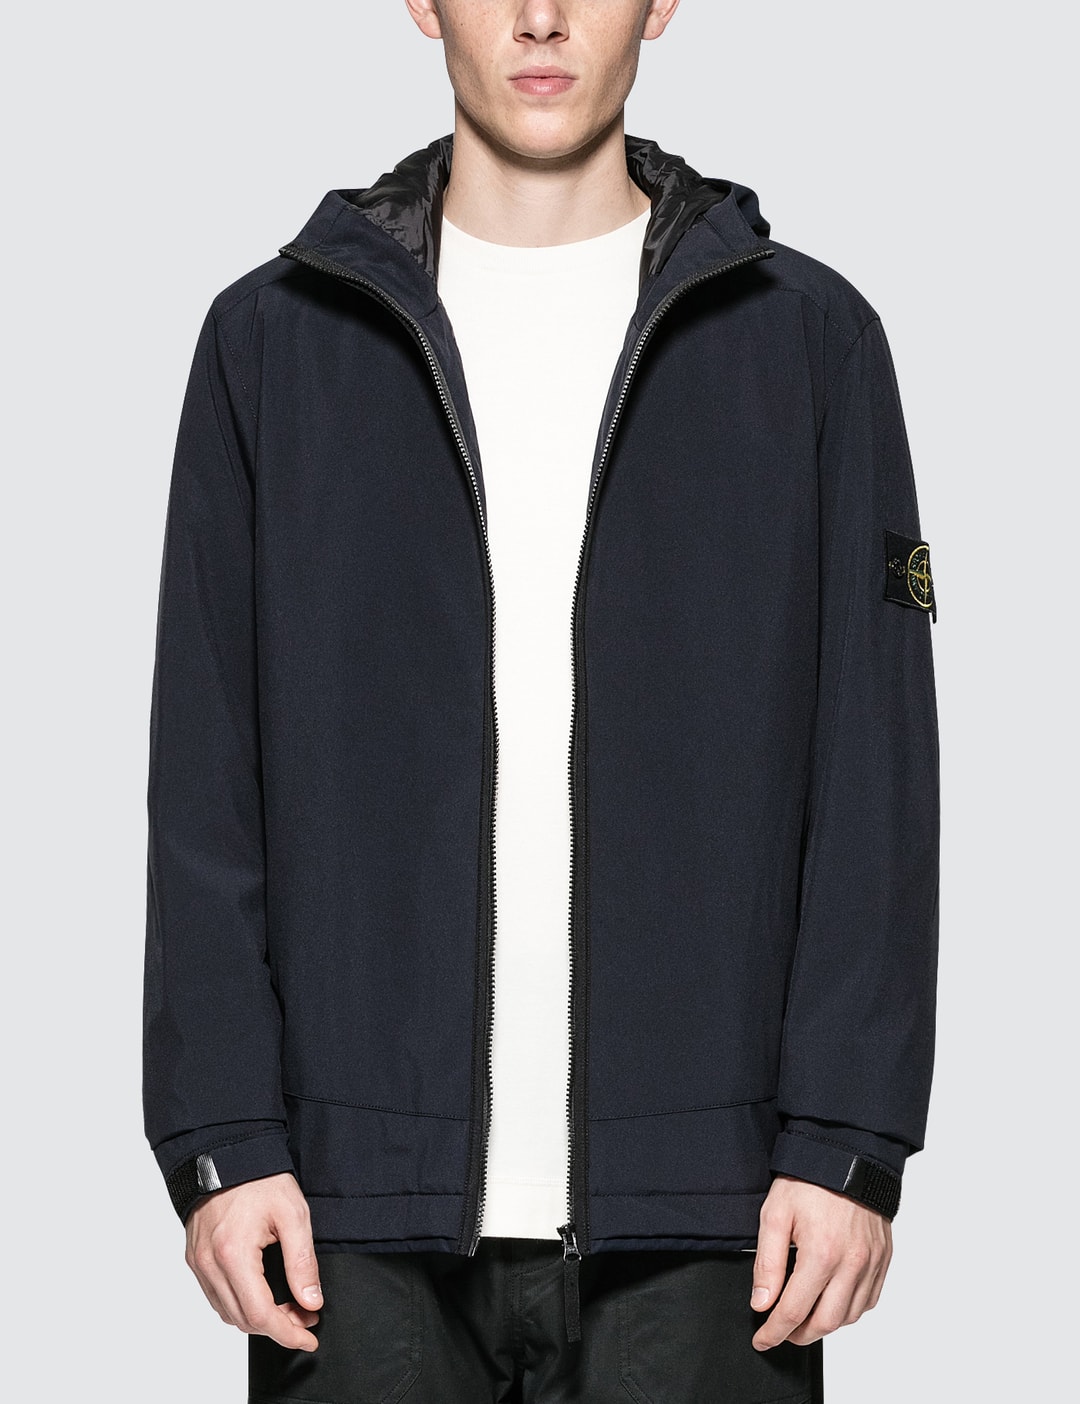 Buitenshuis warmte blootstelling Stone Island - Primaloft Soft Shell Jacket | HBX - Globally Curated Fashion  and Lifestyle by Hypebeast